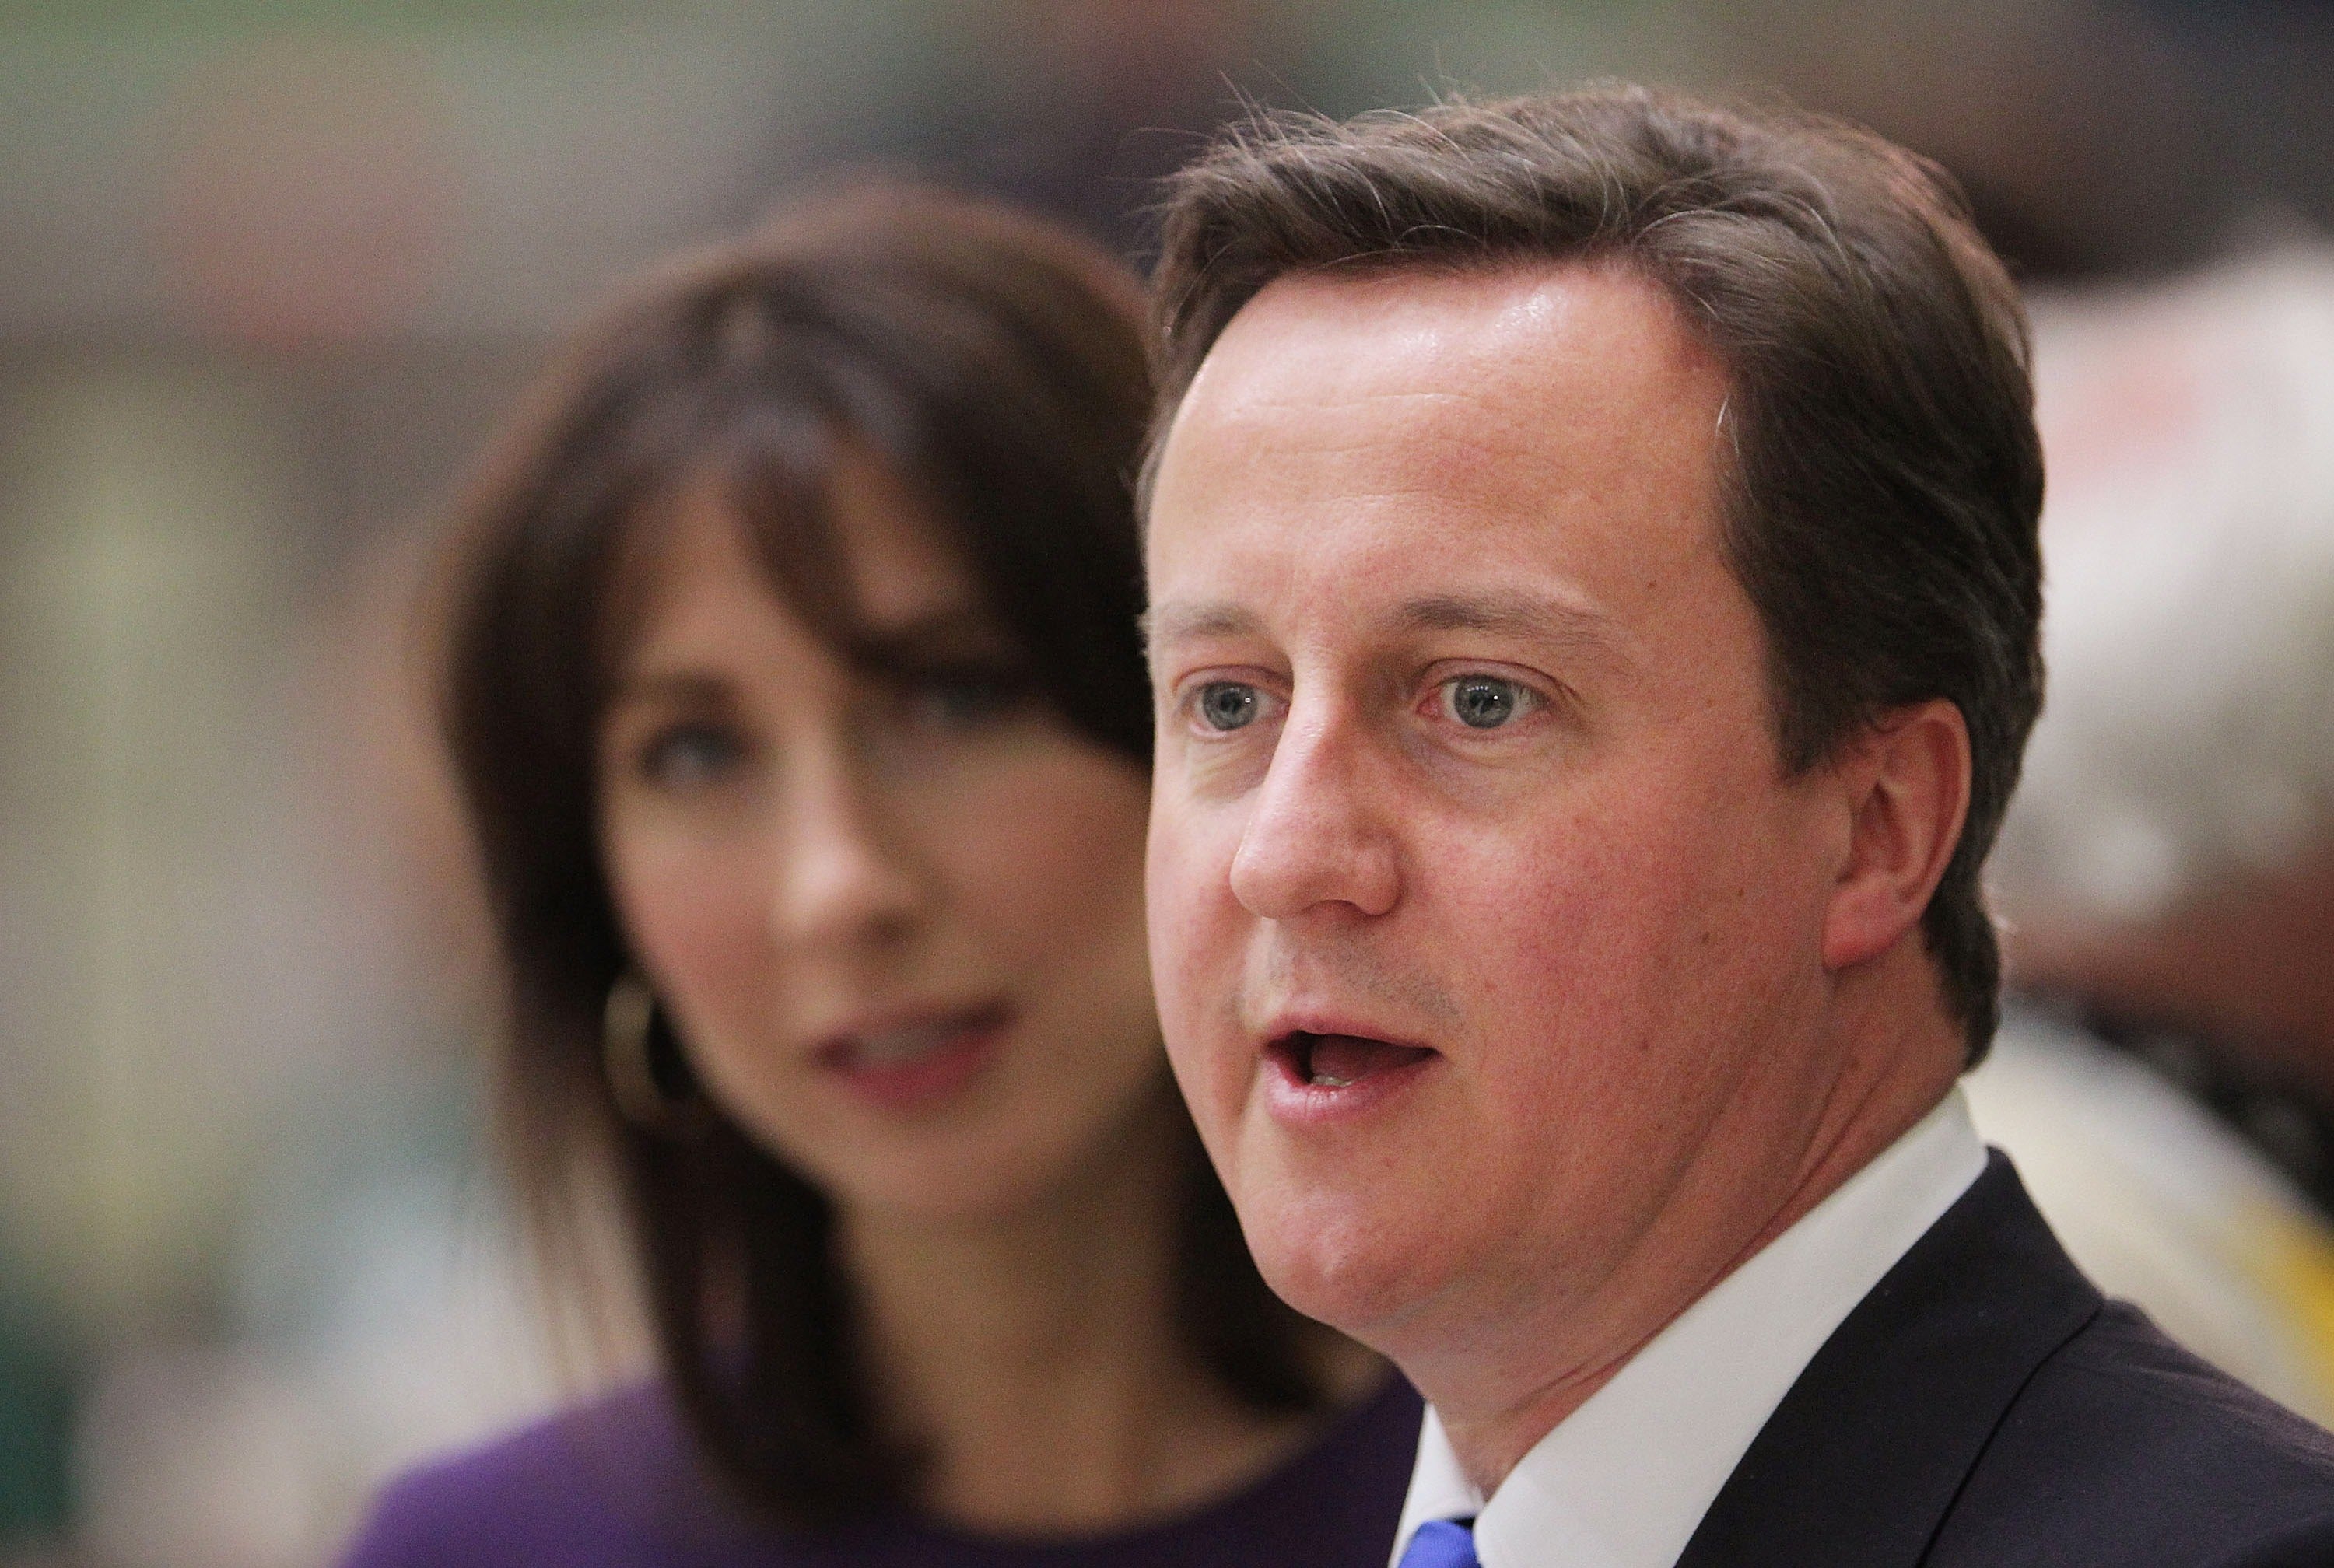 Mr Cameron said he could ‘always’ see the practical arguments in favour of gay marriage